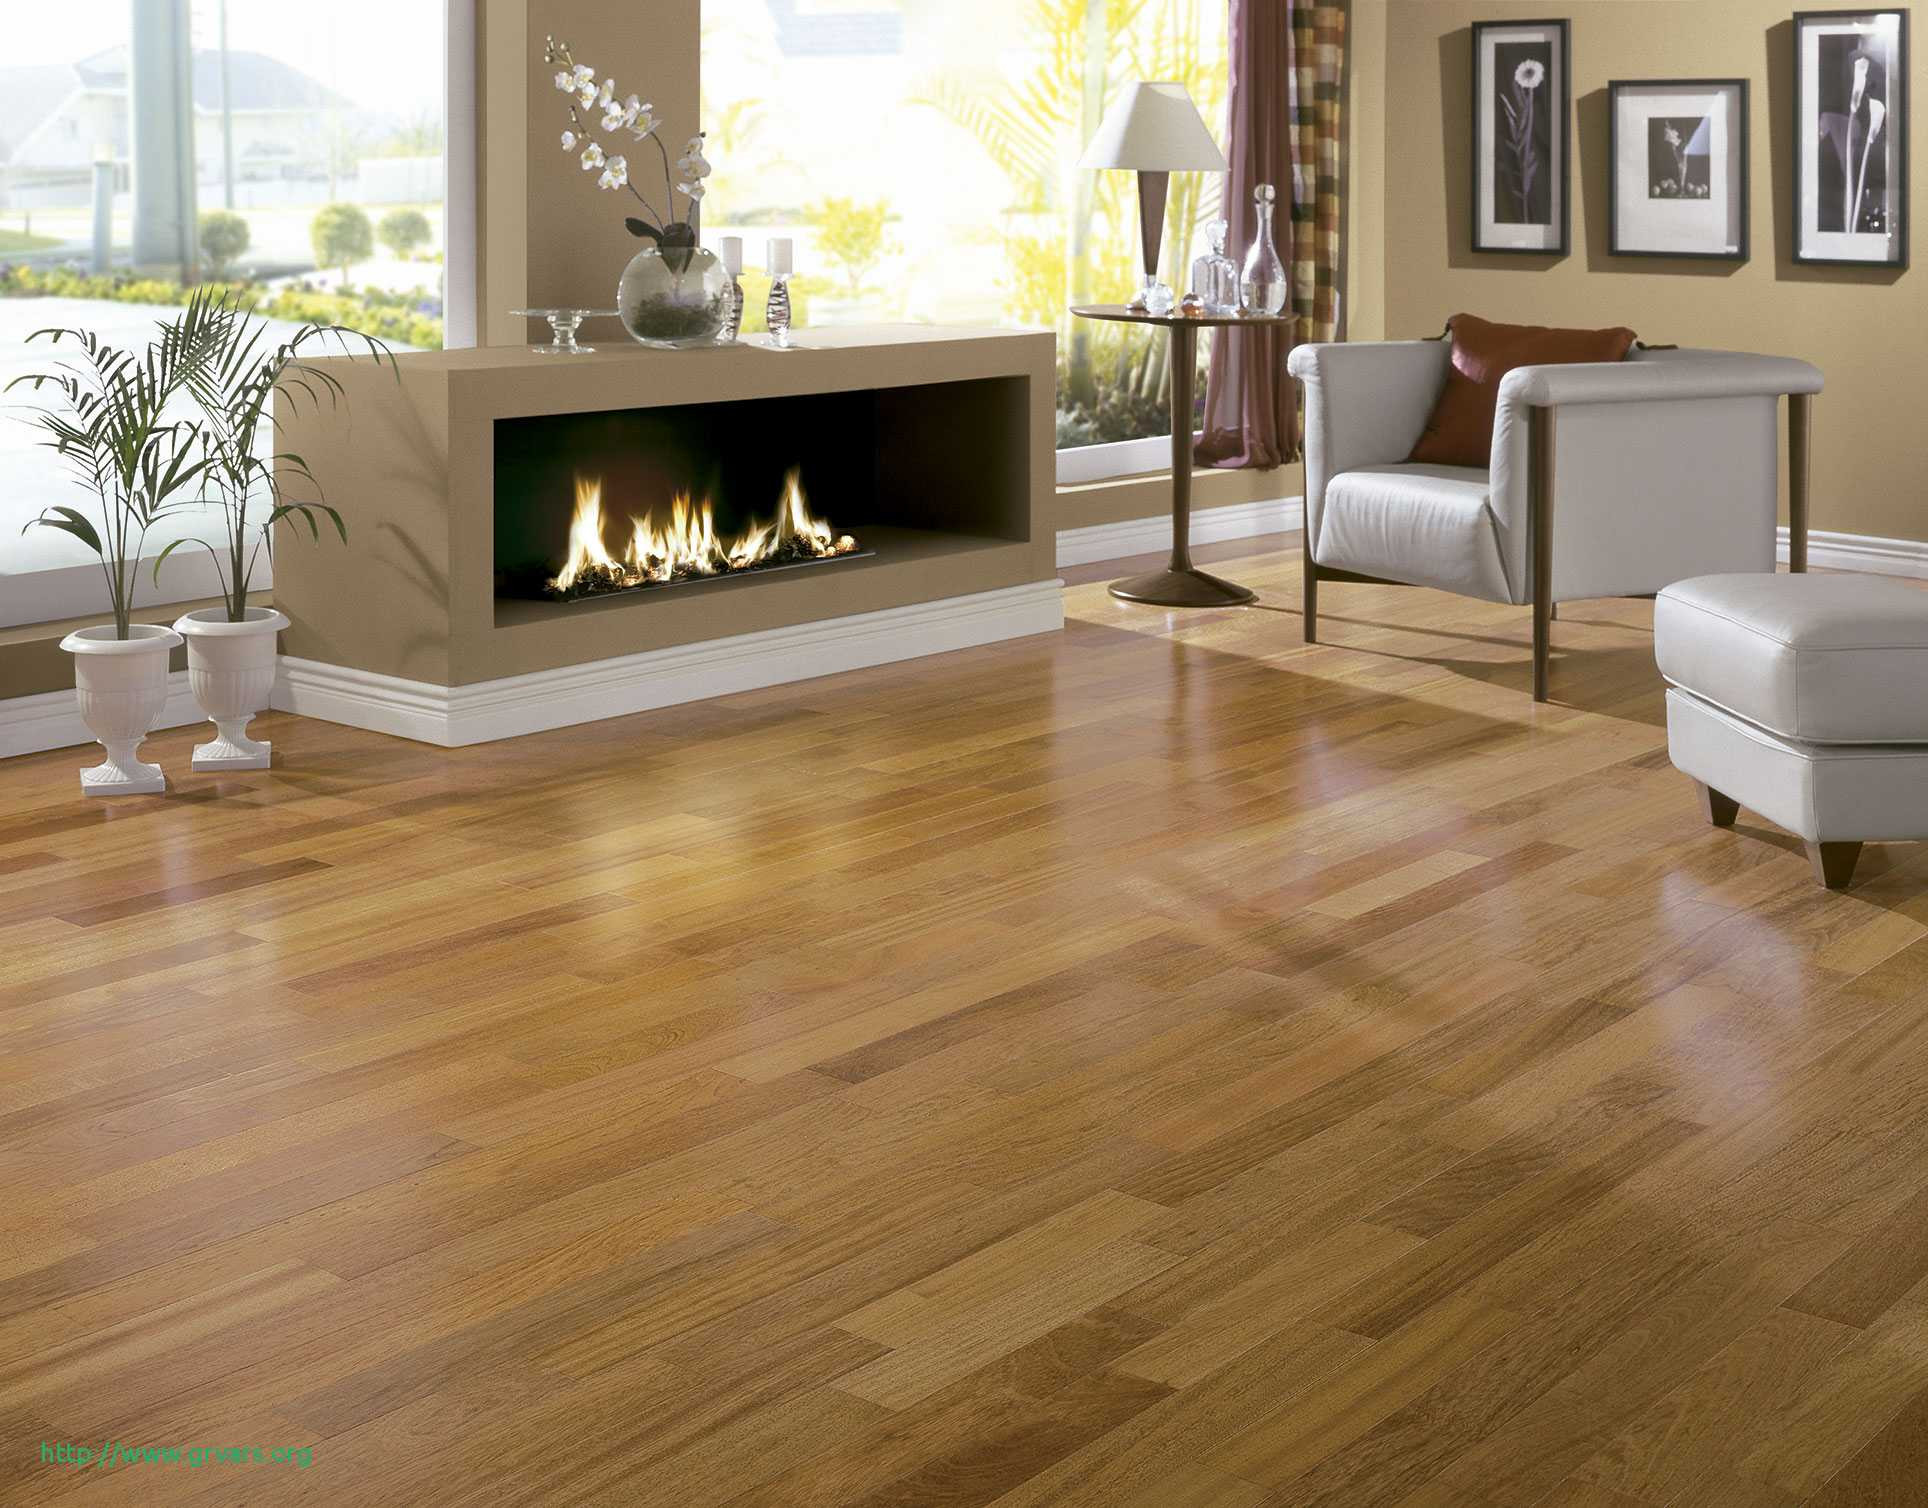 26 Recommended Hardwood Floor Fireplace Transition 2024 free download hardwood floor fireplace transition of difference in hardwood floors charmant engaging discount hardwood with difference in hardwood floors charmant engaging discount hardwood flooring 5 whe